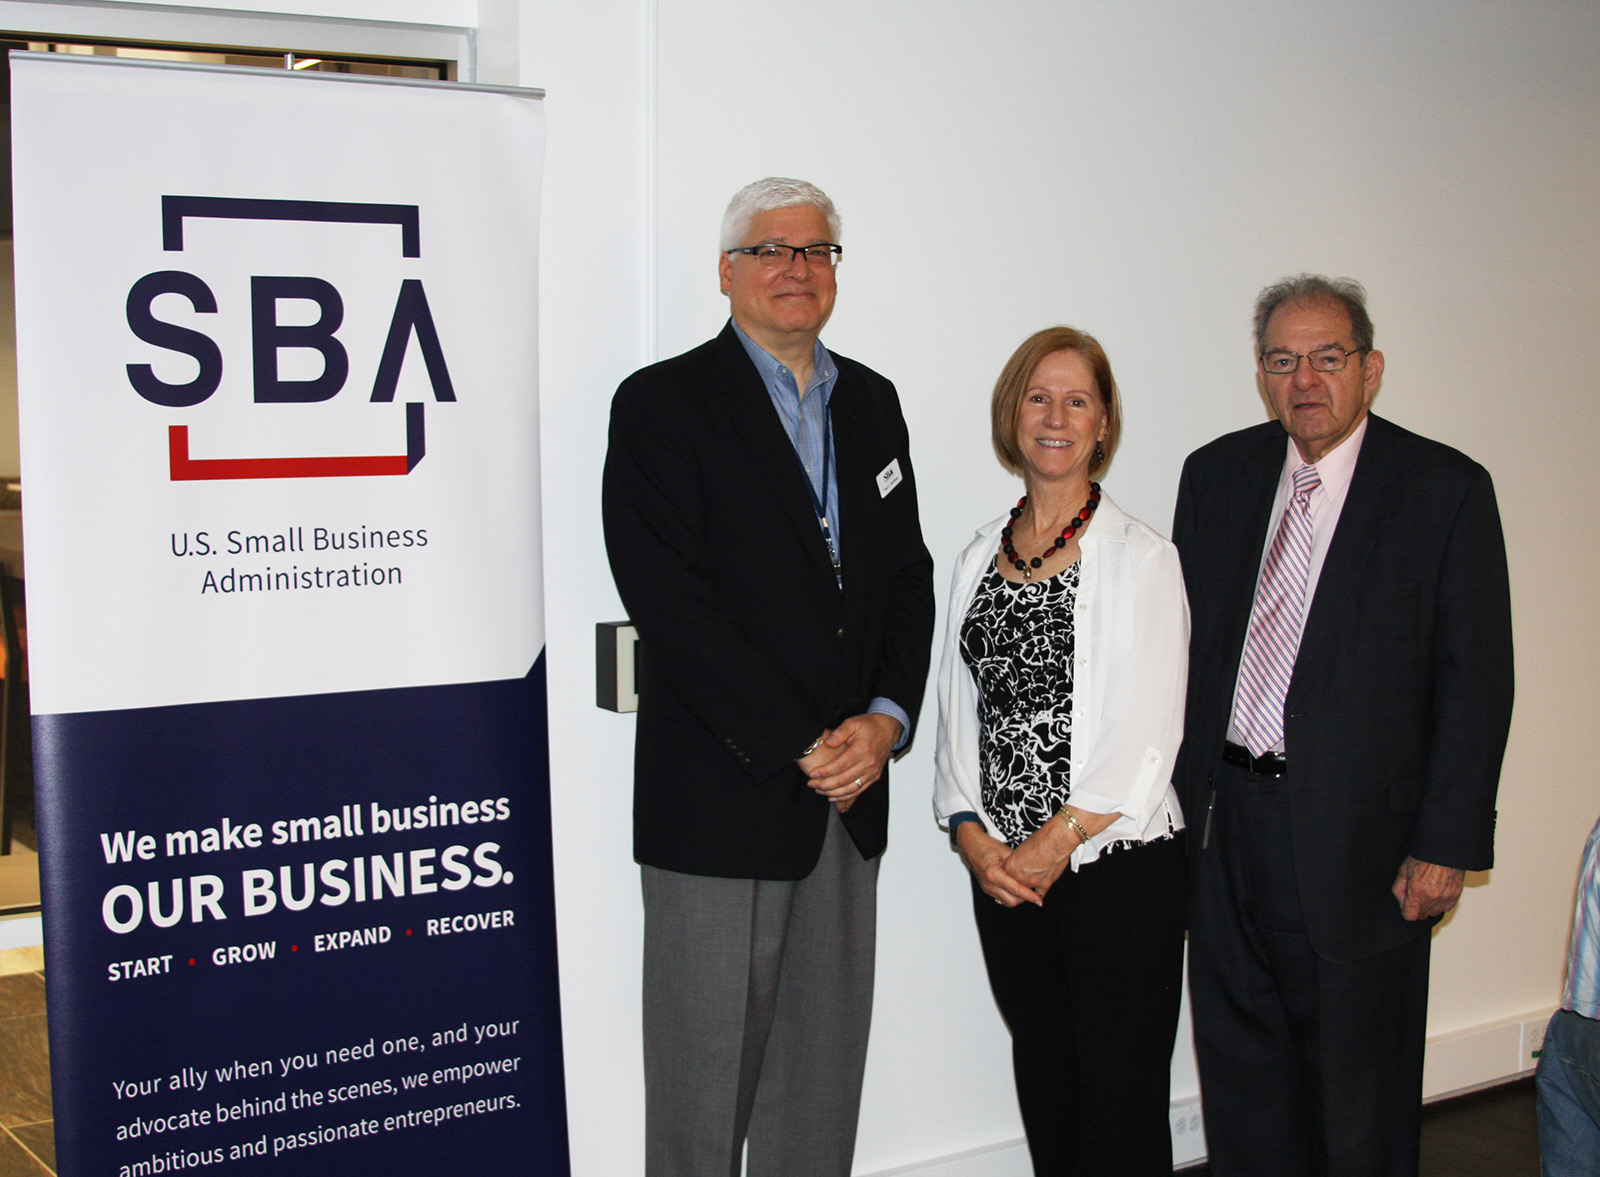 Niagara SBDC receives grant as part of Ralph C. Wilson Jr. Foundation’s COVID-19 Small Business Relief Fund